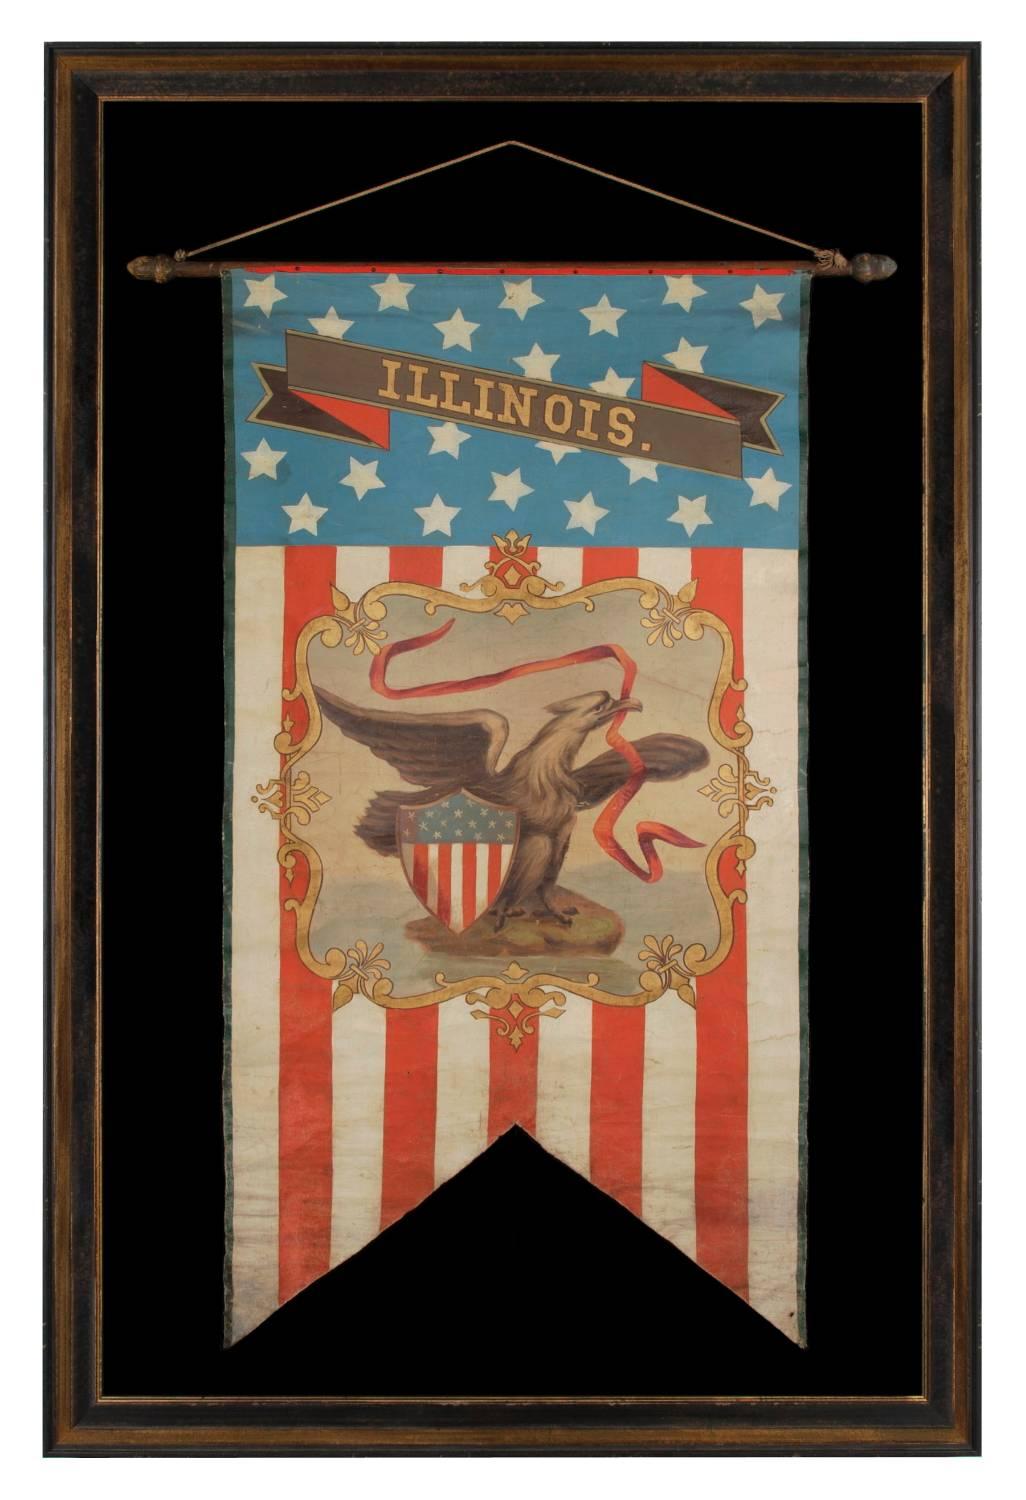 North American Hand-Painted Patriotic Banner With The Seal of the State of Illinois For Sale